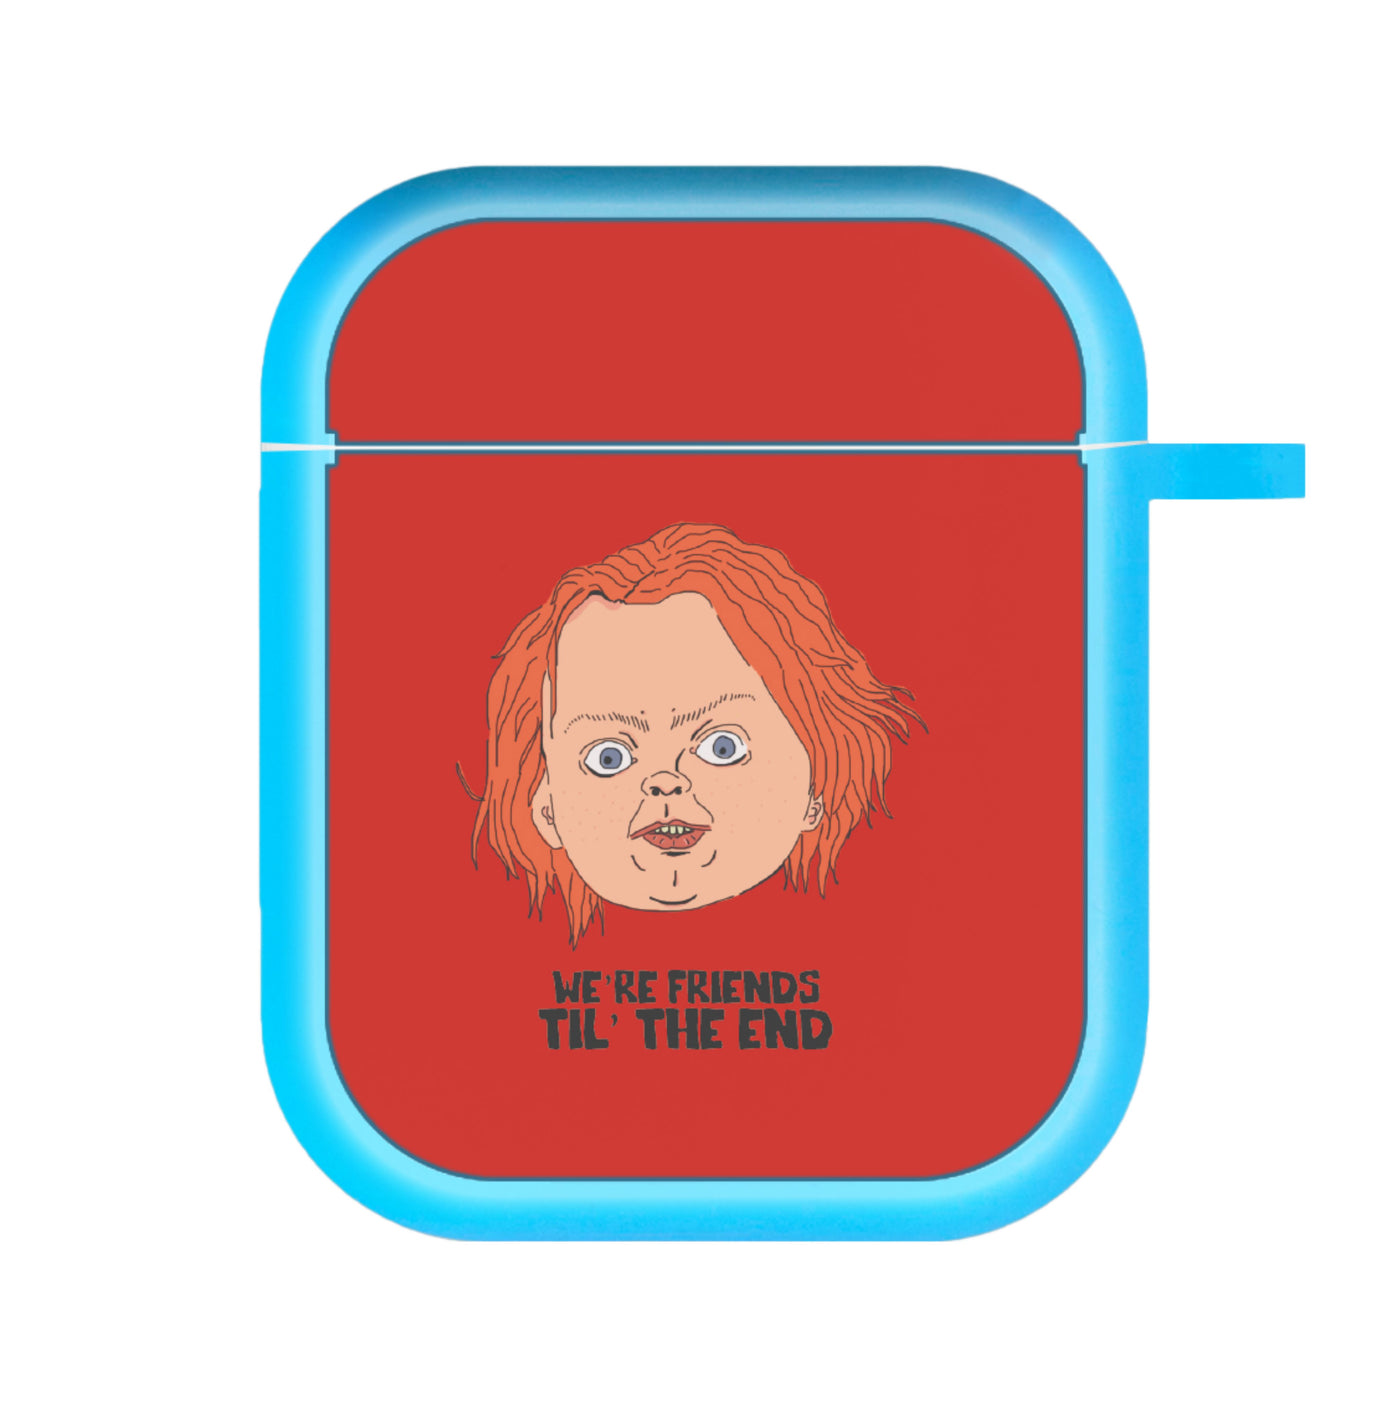 We're Friends - Chucky AirPods Case